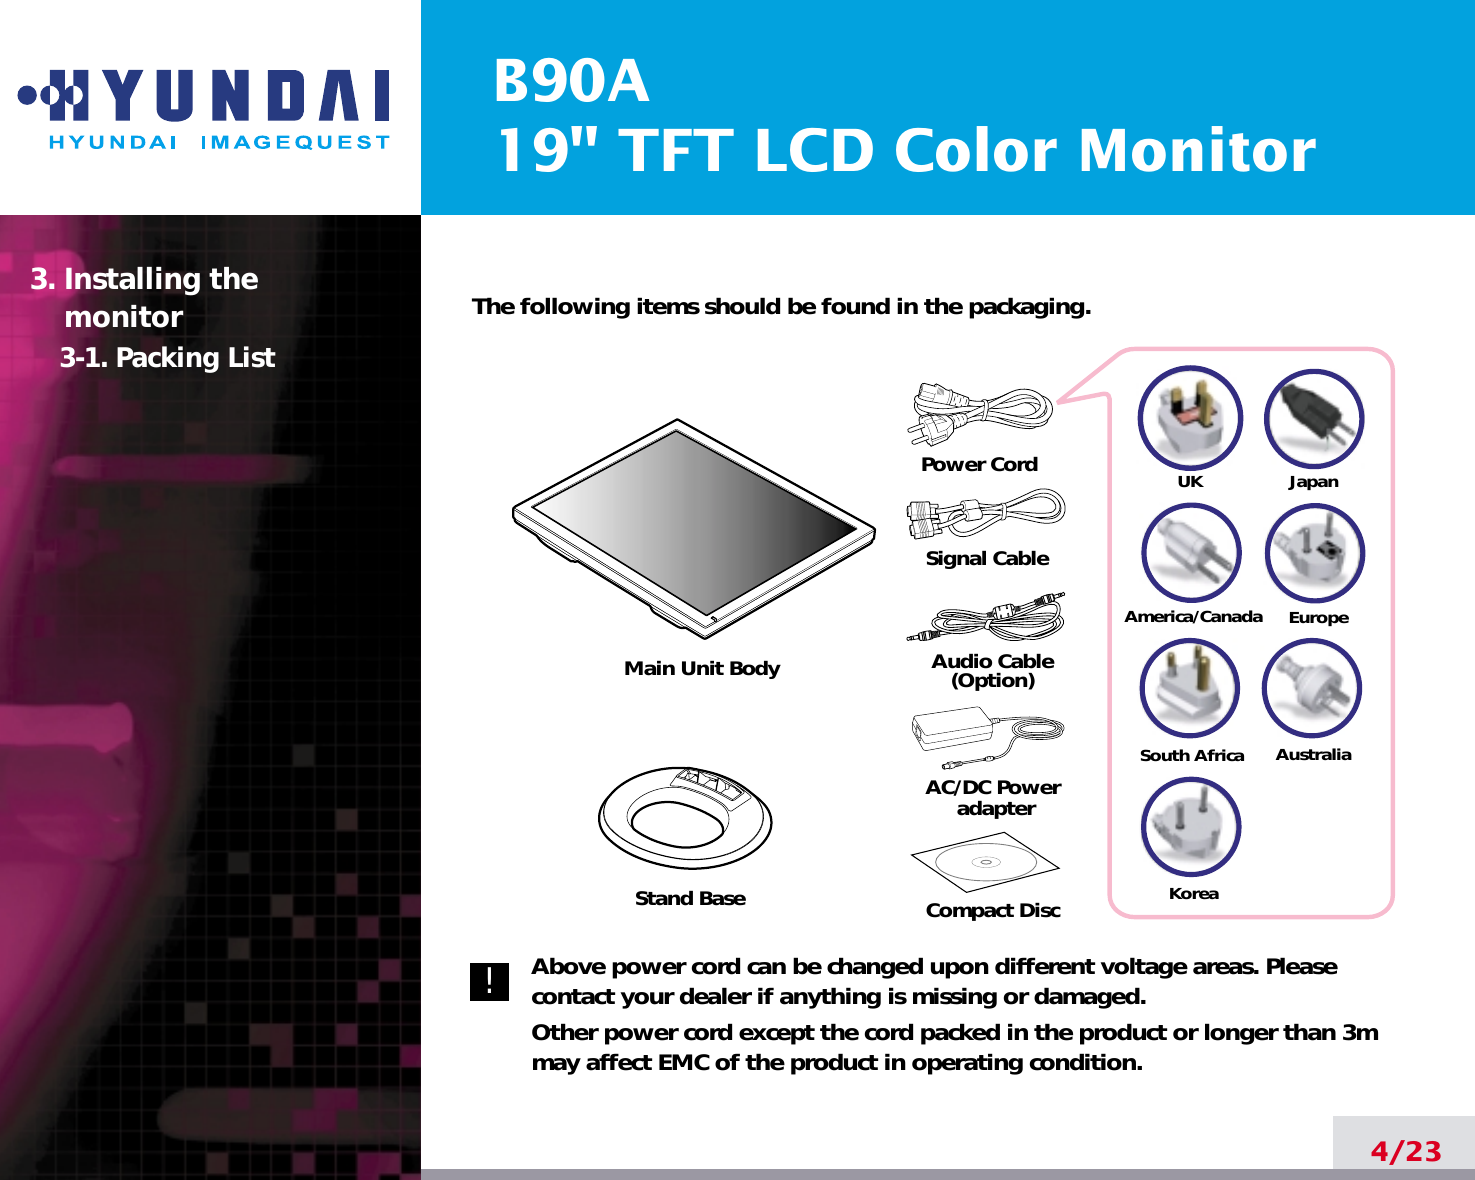 B90A19&quot; TFT LCD Color Monitor4/23The following items should be found in the packaging.Above power cord can be changed upon different voltage areas. Pleasecontact your dealer if anything is missing or damaged.Other power cord except the cord packed in the product or longer than 3mmay affect EMC of the product in operating condition.3. Installing the monitor3-1. Packing List!UKAmerica/CanadaJapanAustraliaKoreaEuropeSouth AfricaPower CordSignal CableAudio Cable(Option)Compact DiscAC/DC PoweradapterStand BaseMain Unit Body